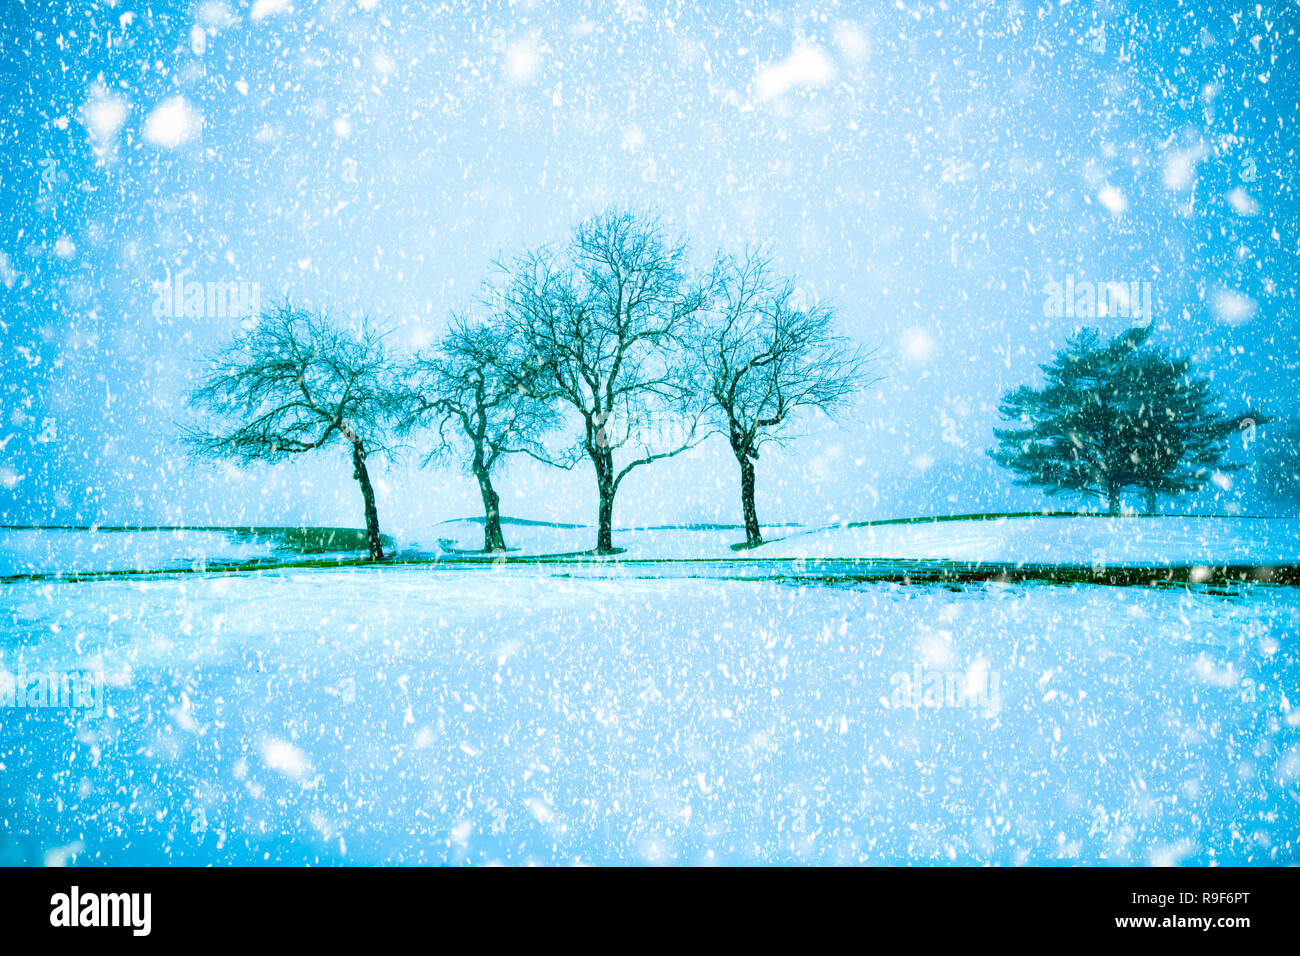 Trees on snowy evening with snowflakes falling during winter blizzard Stock Photo